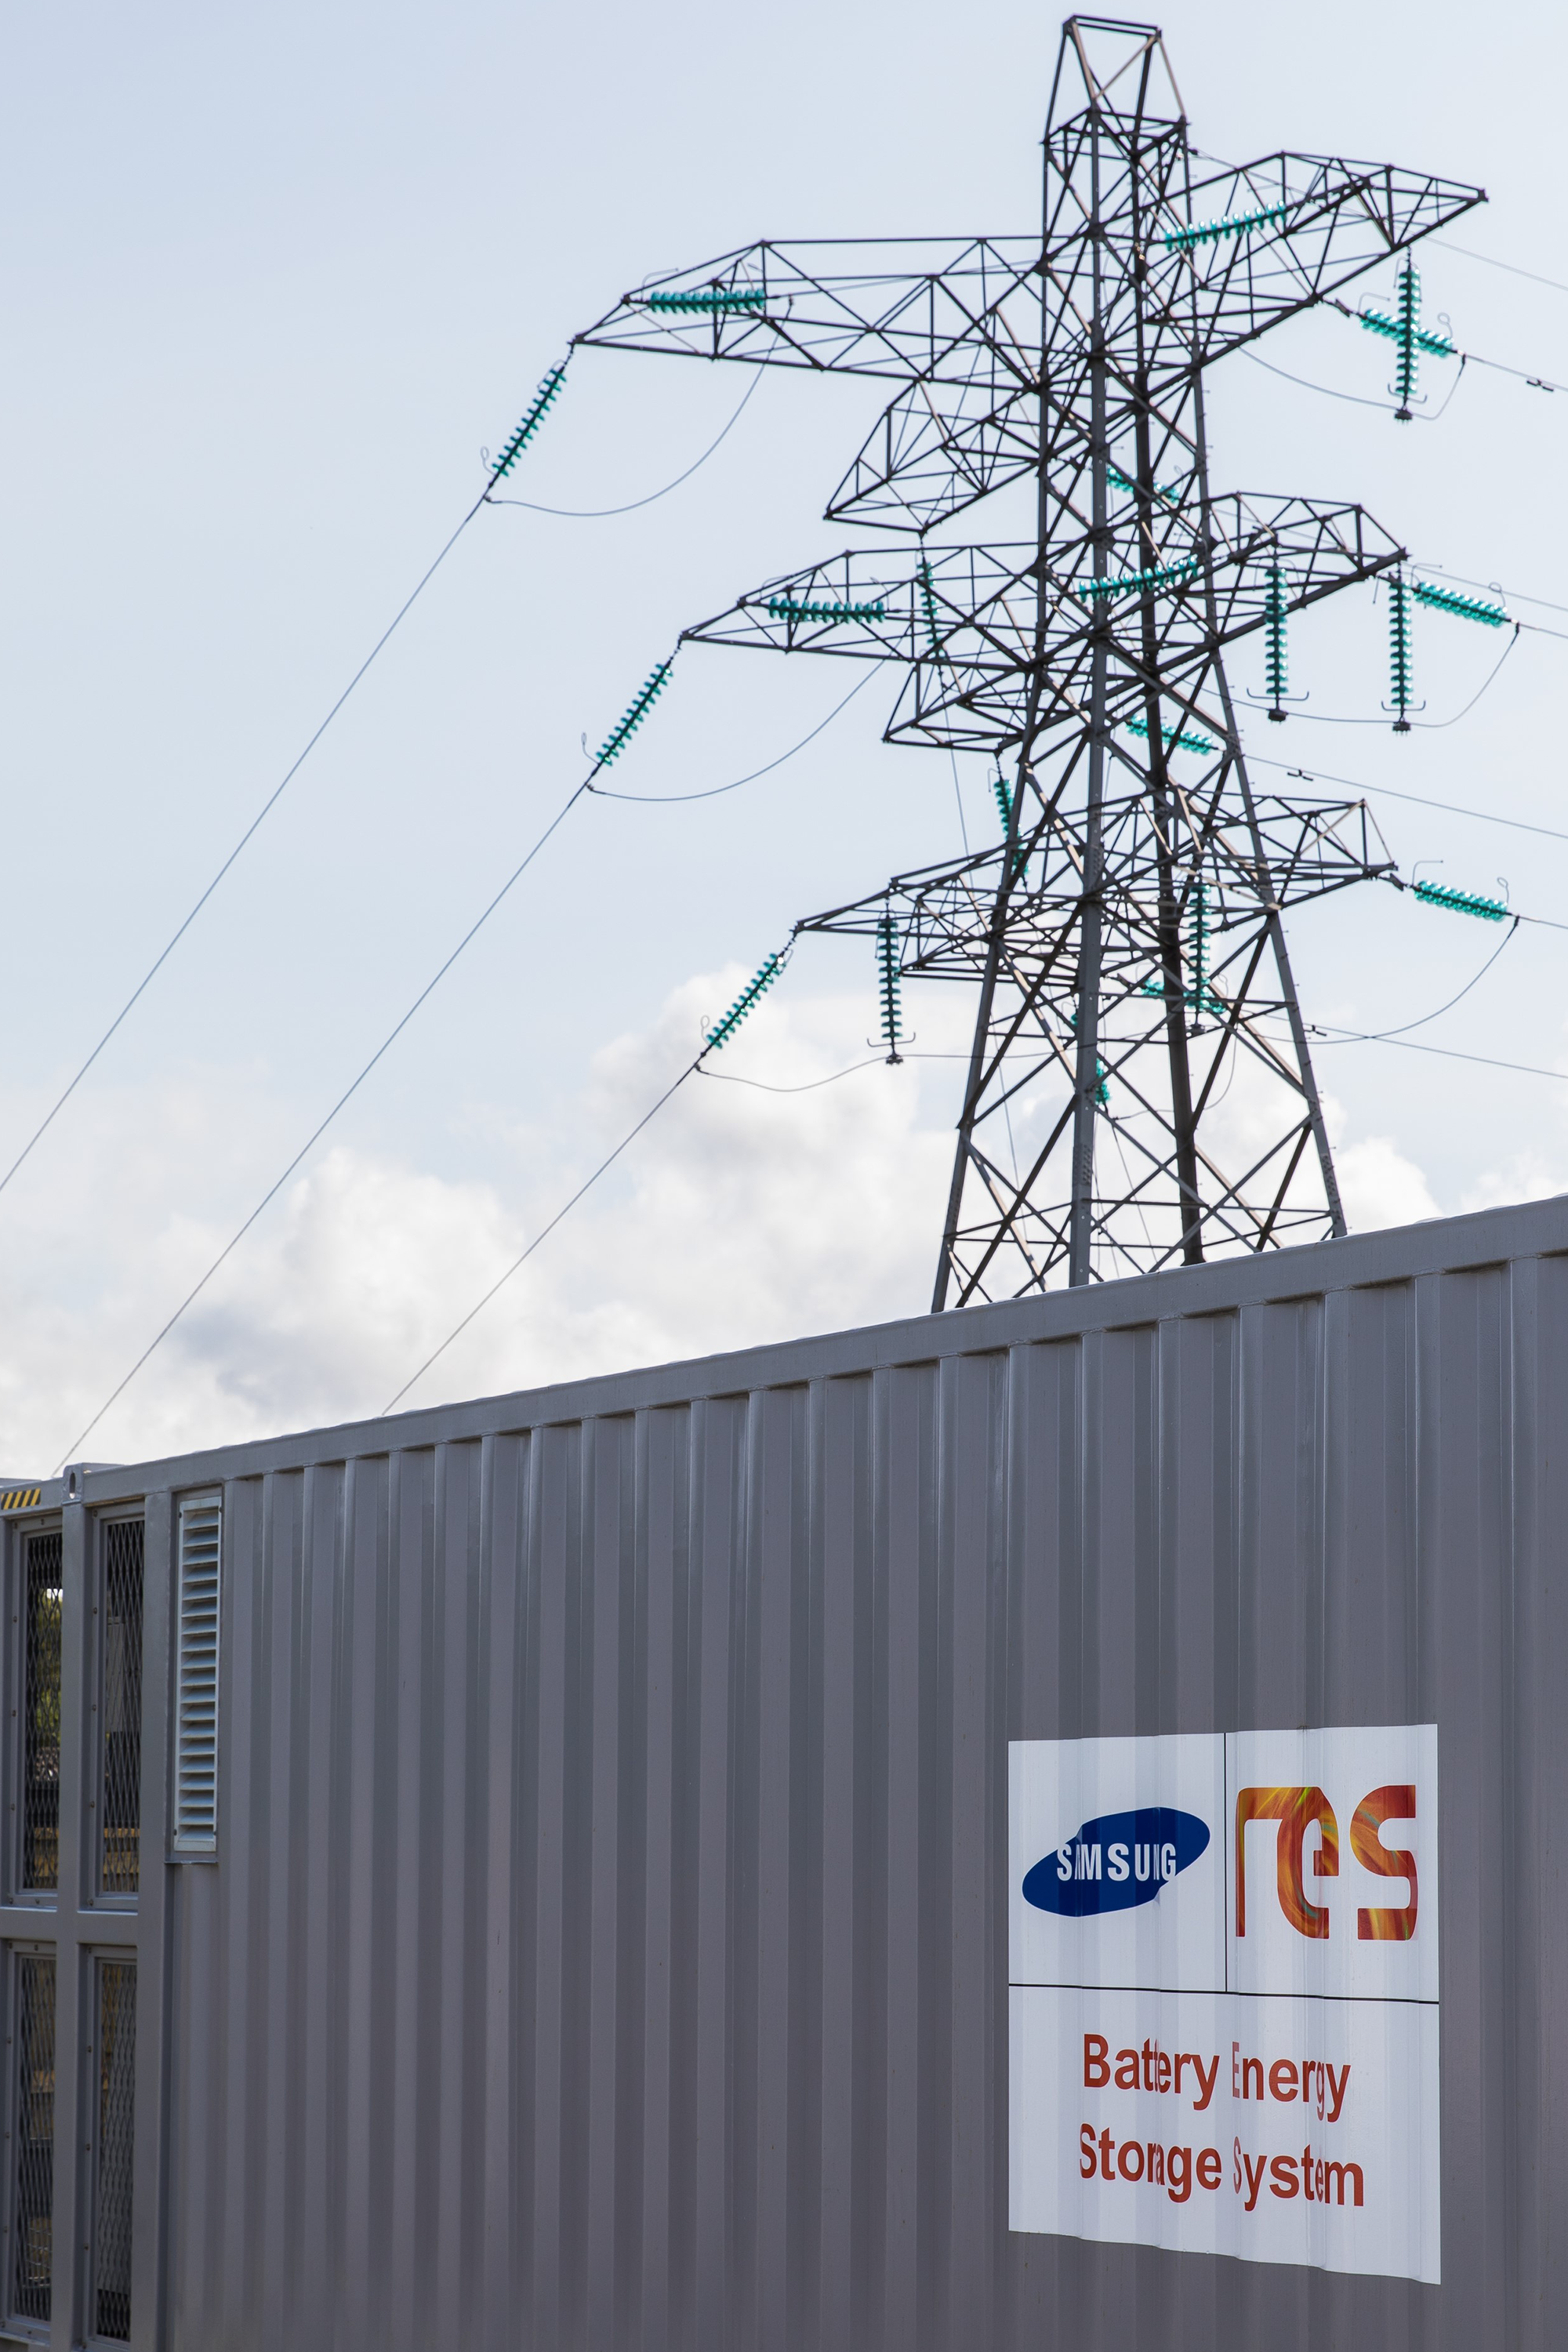 132kV lattice tower, part of the grid connection solution for a commercial scale battery energy storage system in the UK 